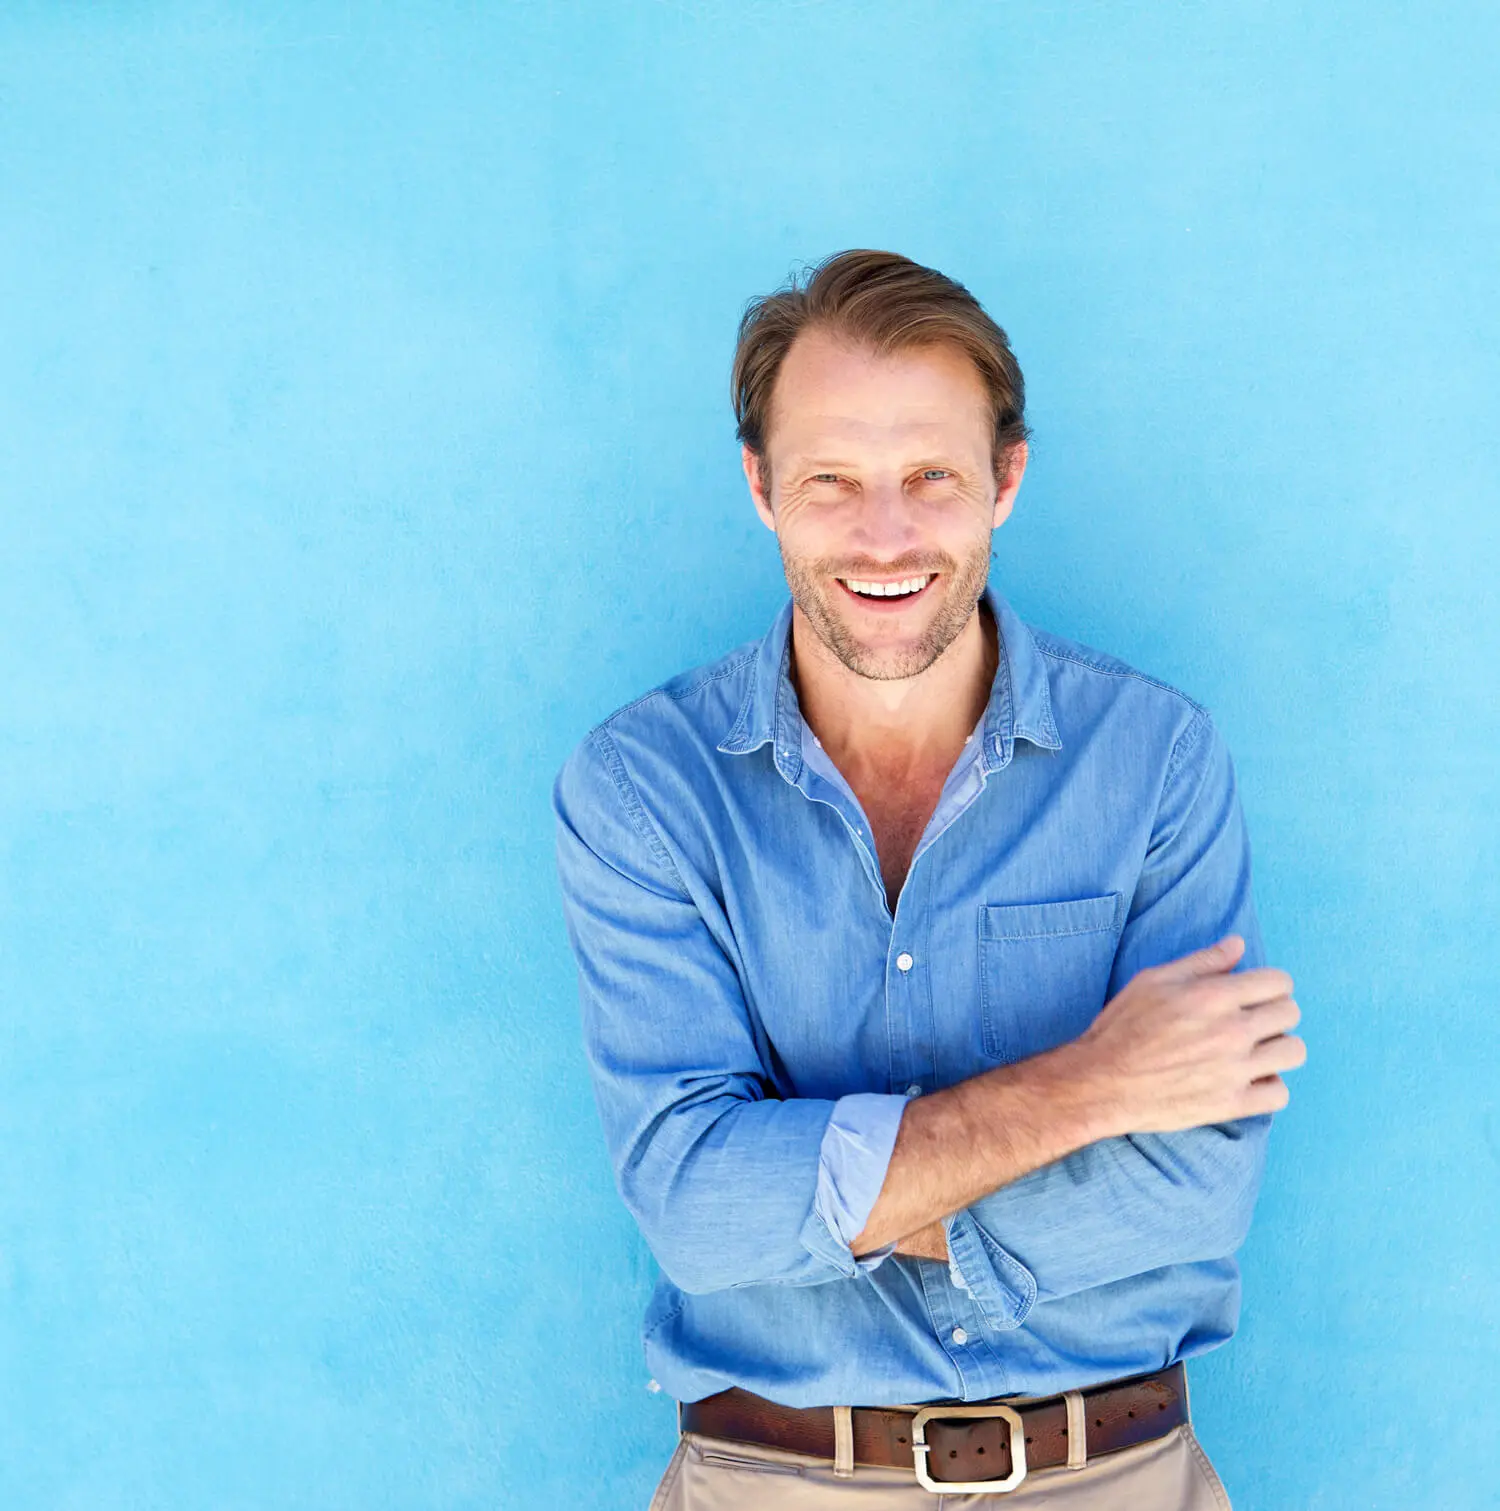 Man in a blue shirt standing in front of a blue wall